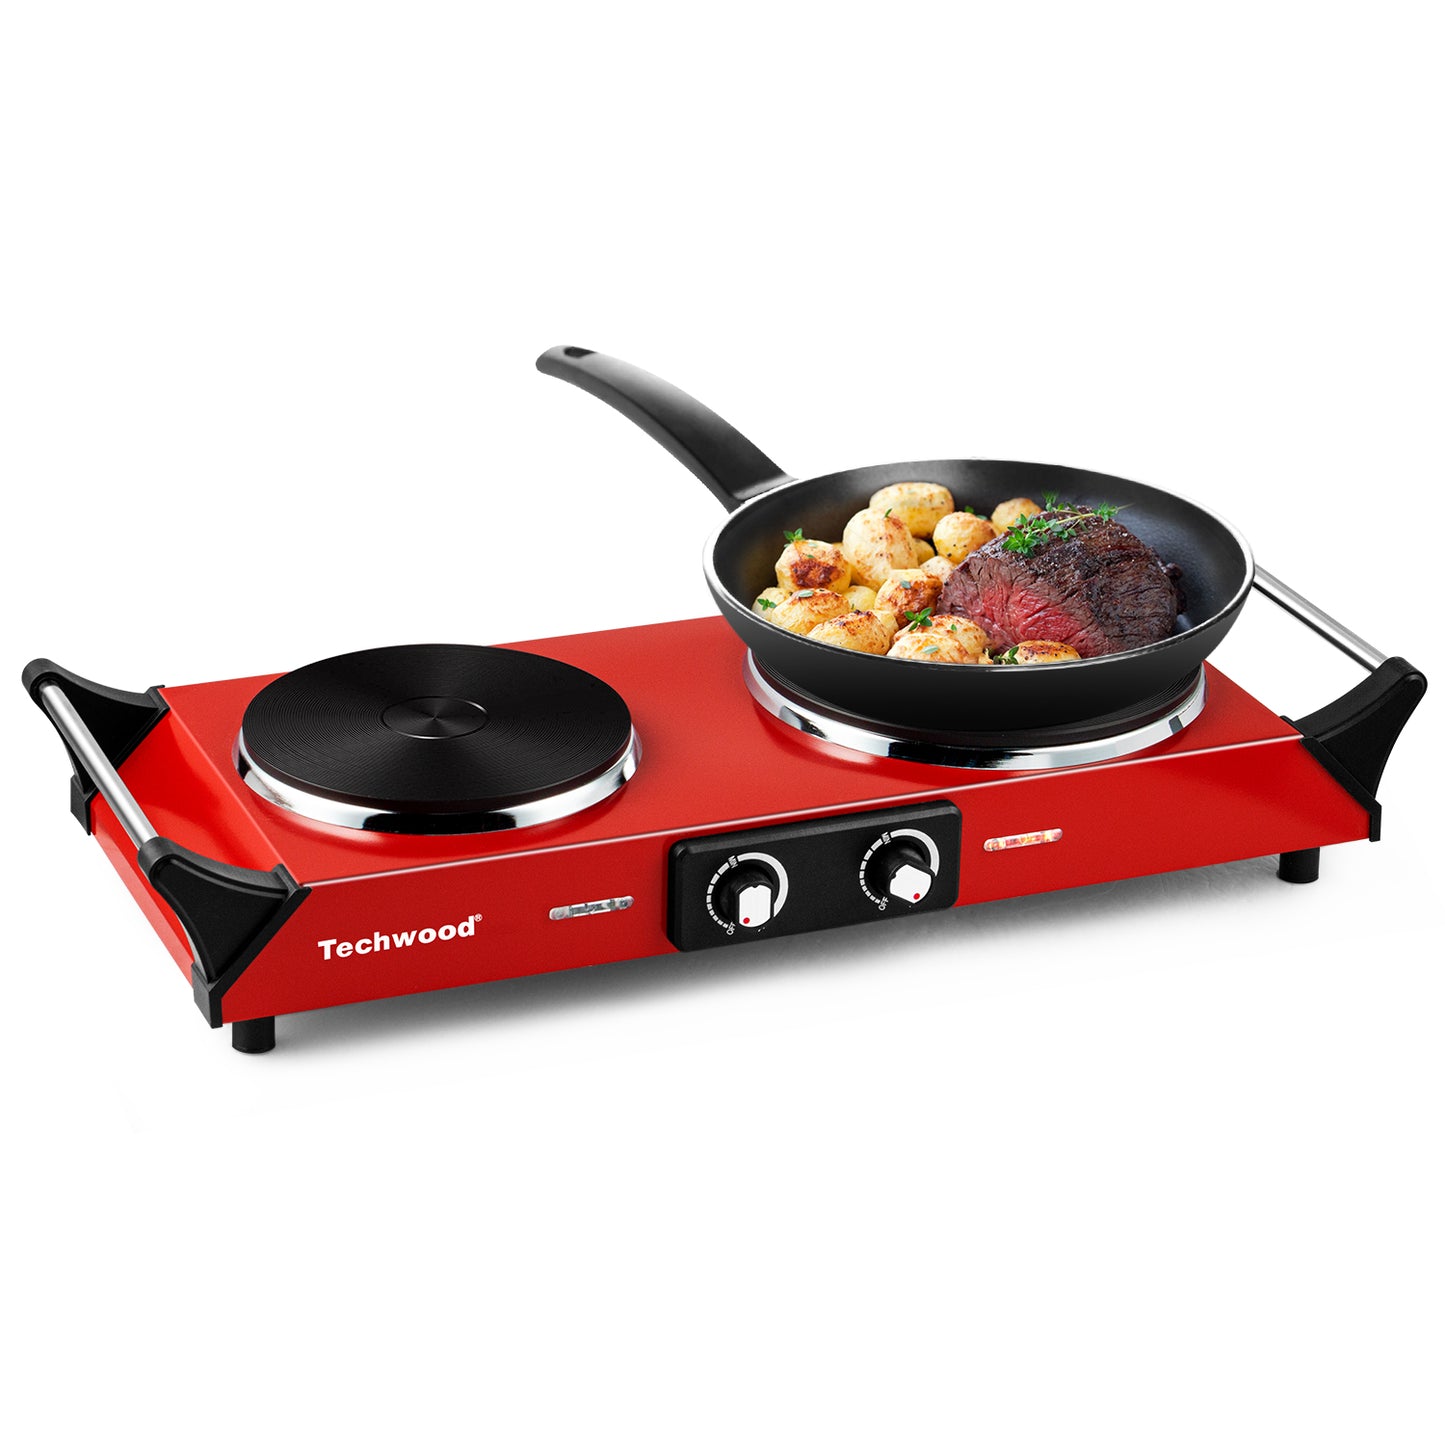 CUSIMAX 1800W Hot Plate, Cast Iron Double Burner, Electric Cooktop